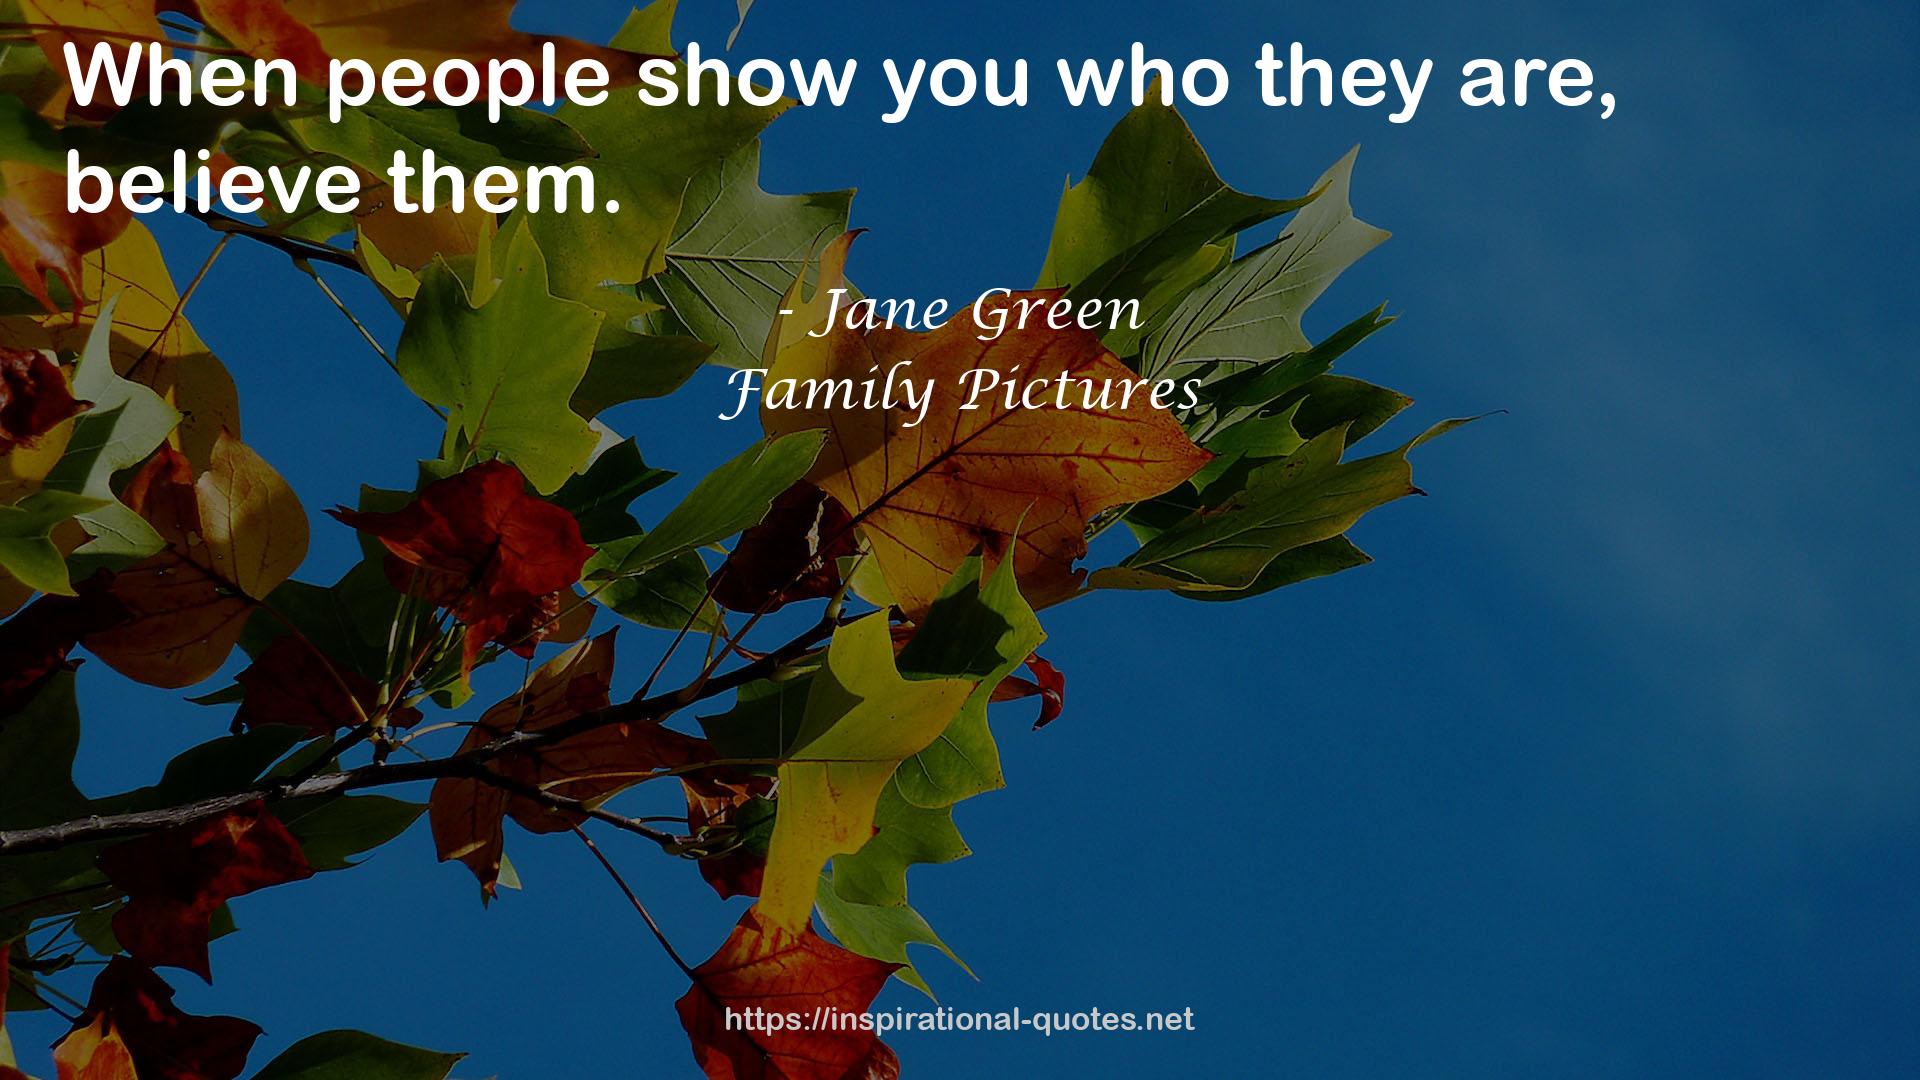 Family Pictures QUOTES